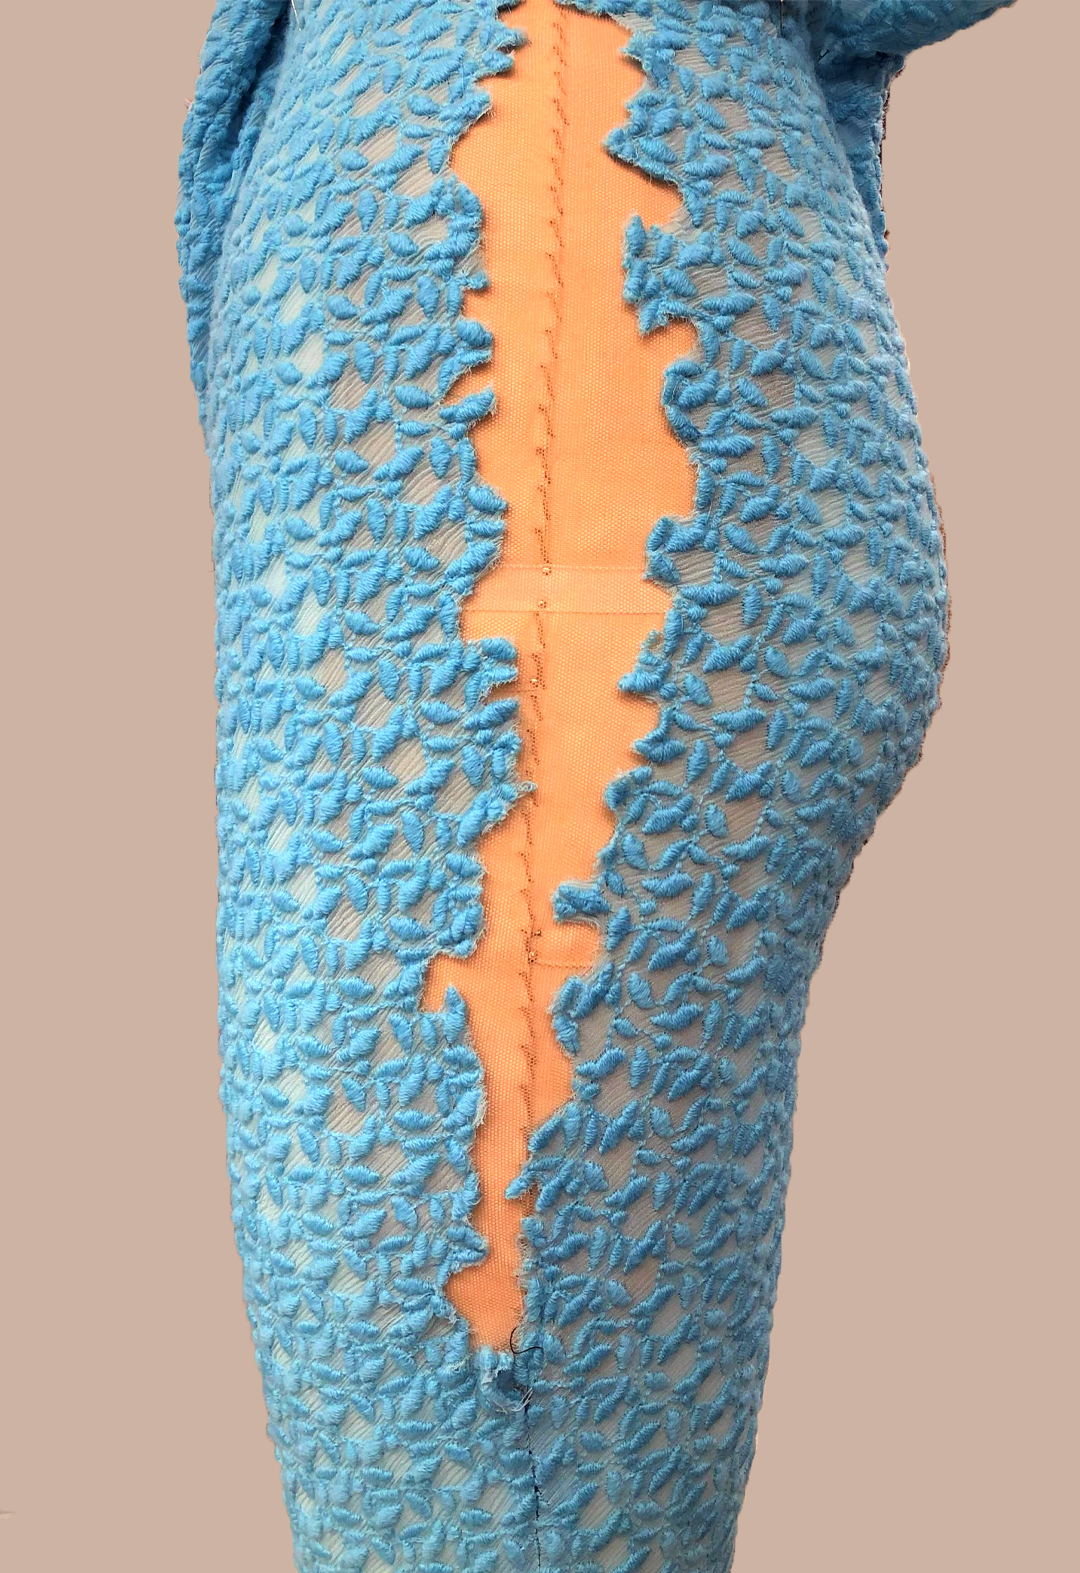 Side view of leg.